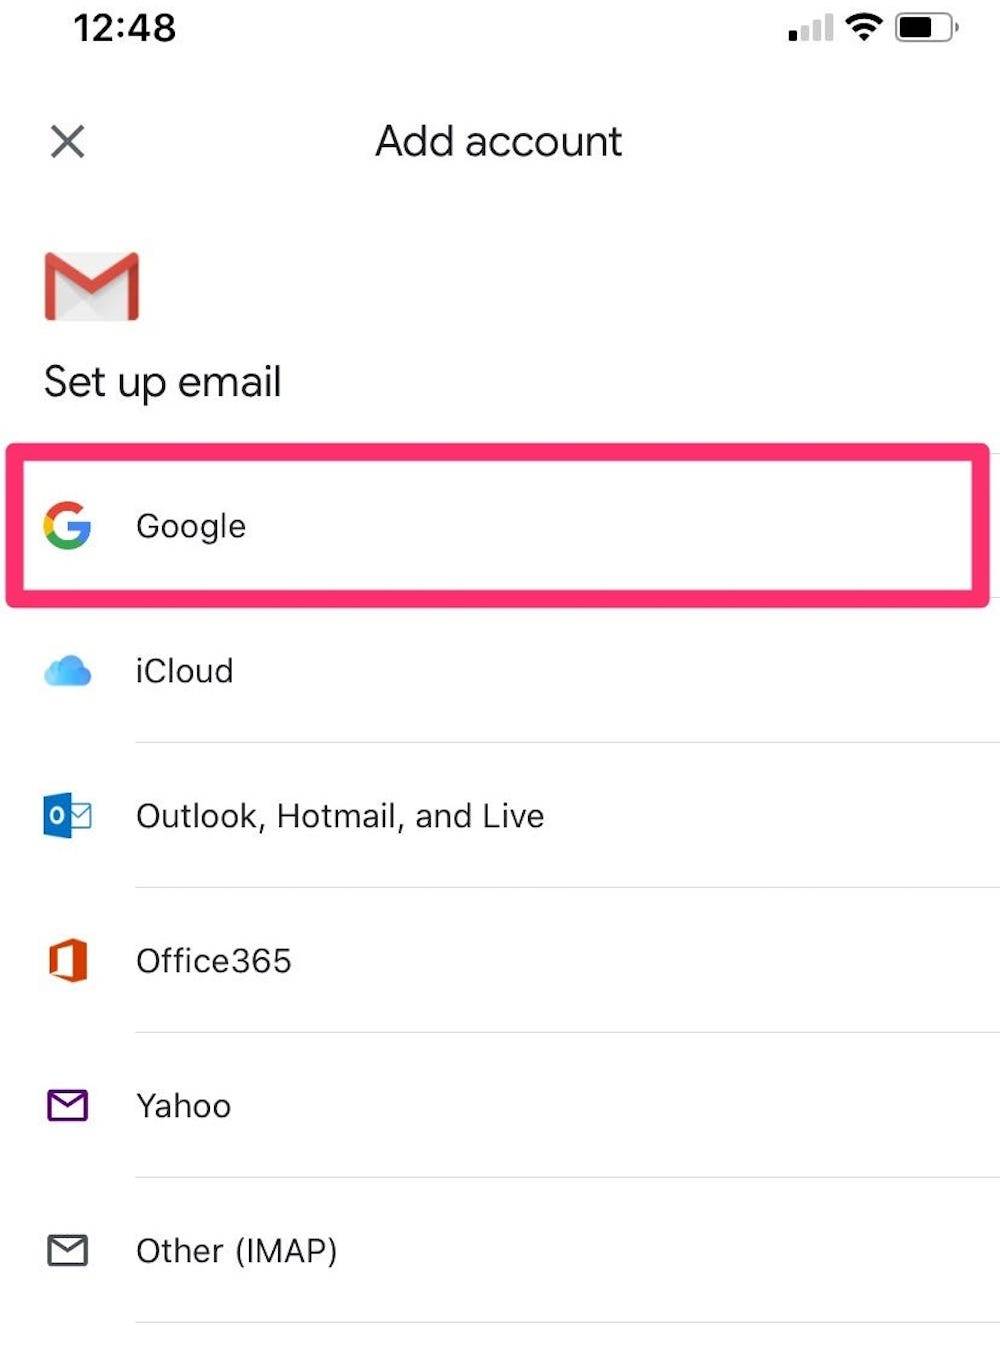 How to login to Gmail with another account (mobile and PC/laptop)